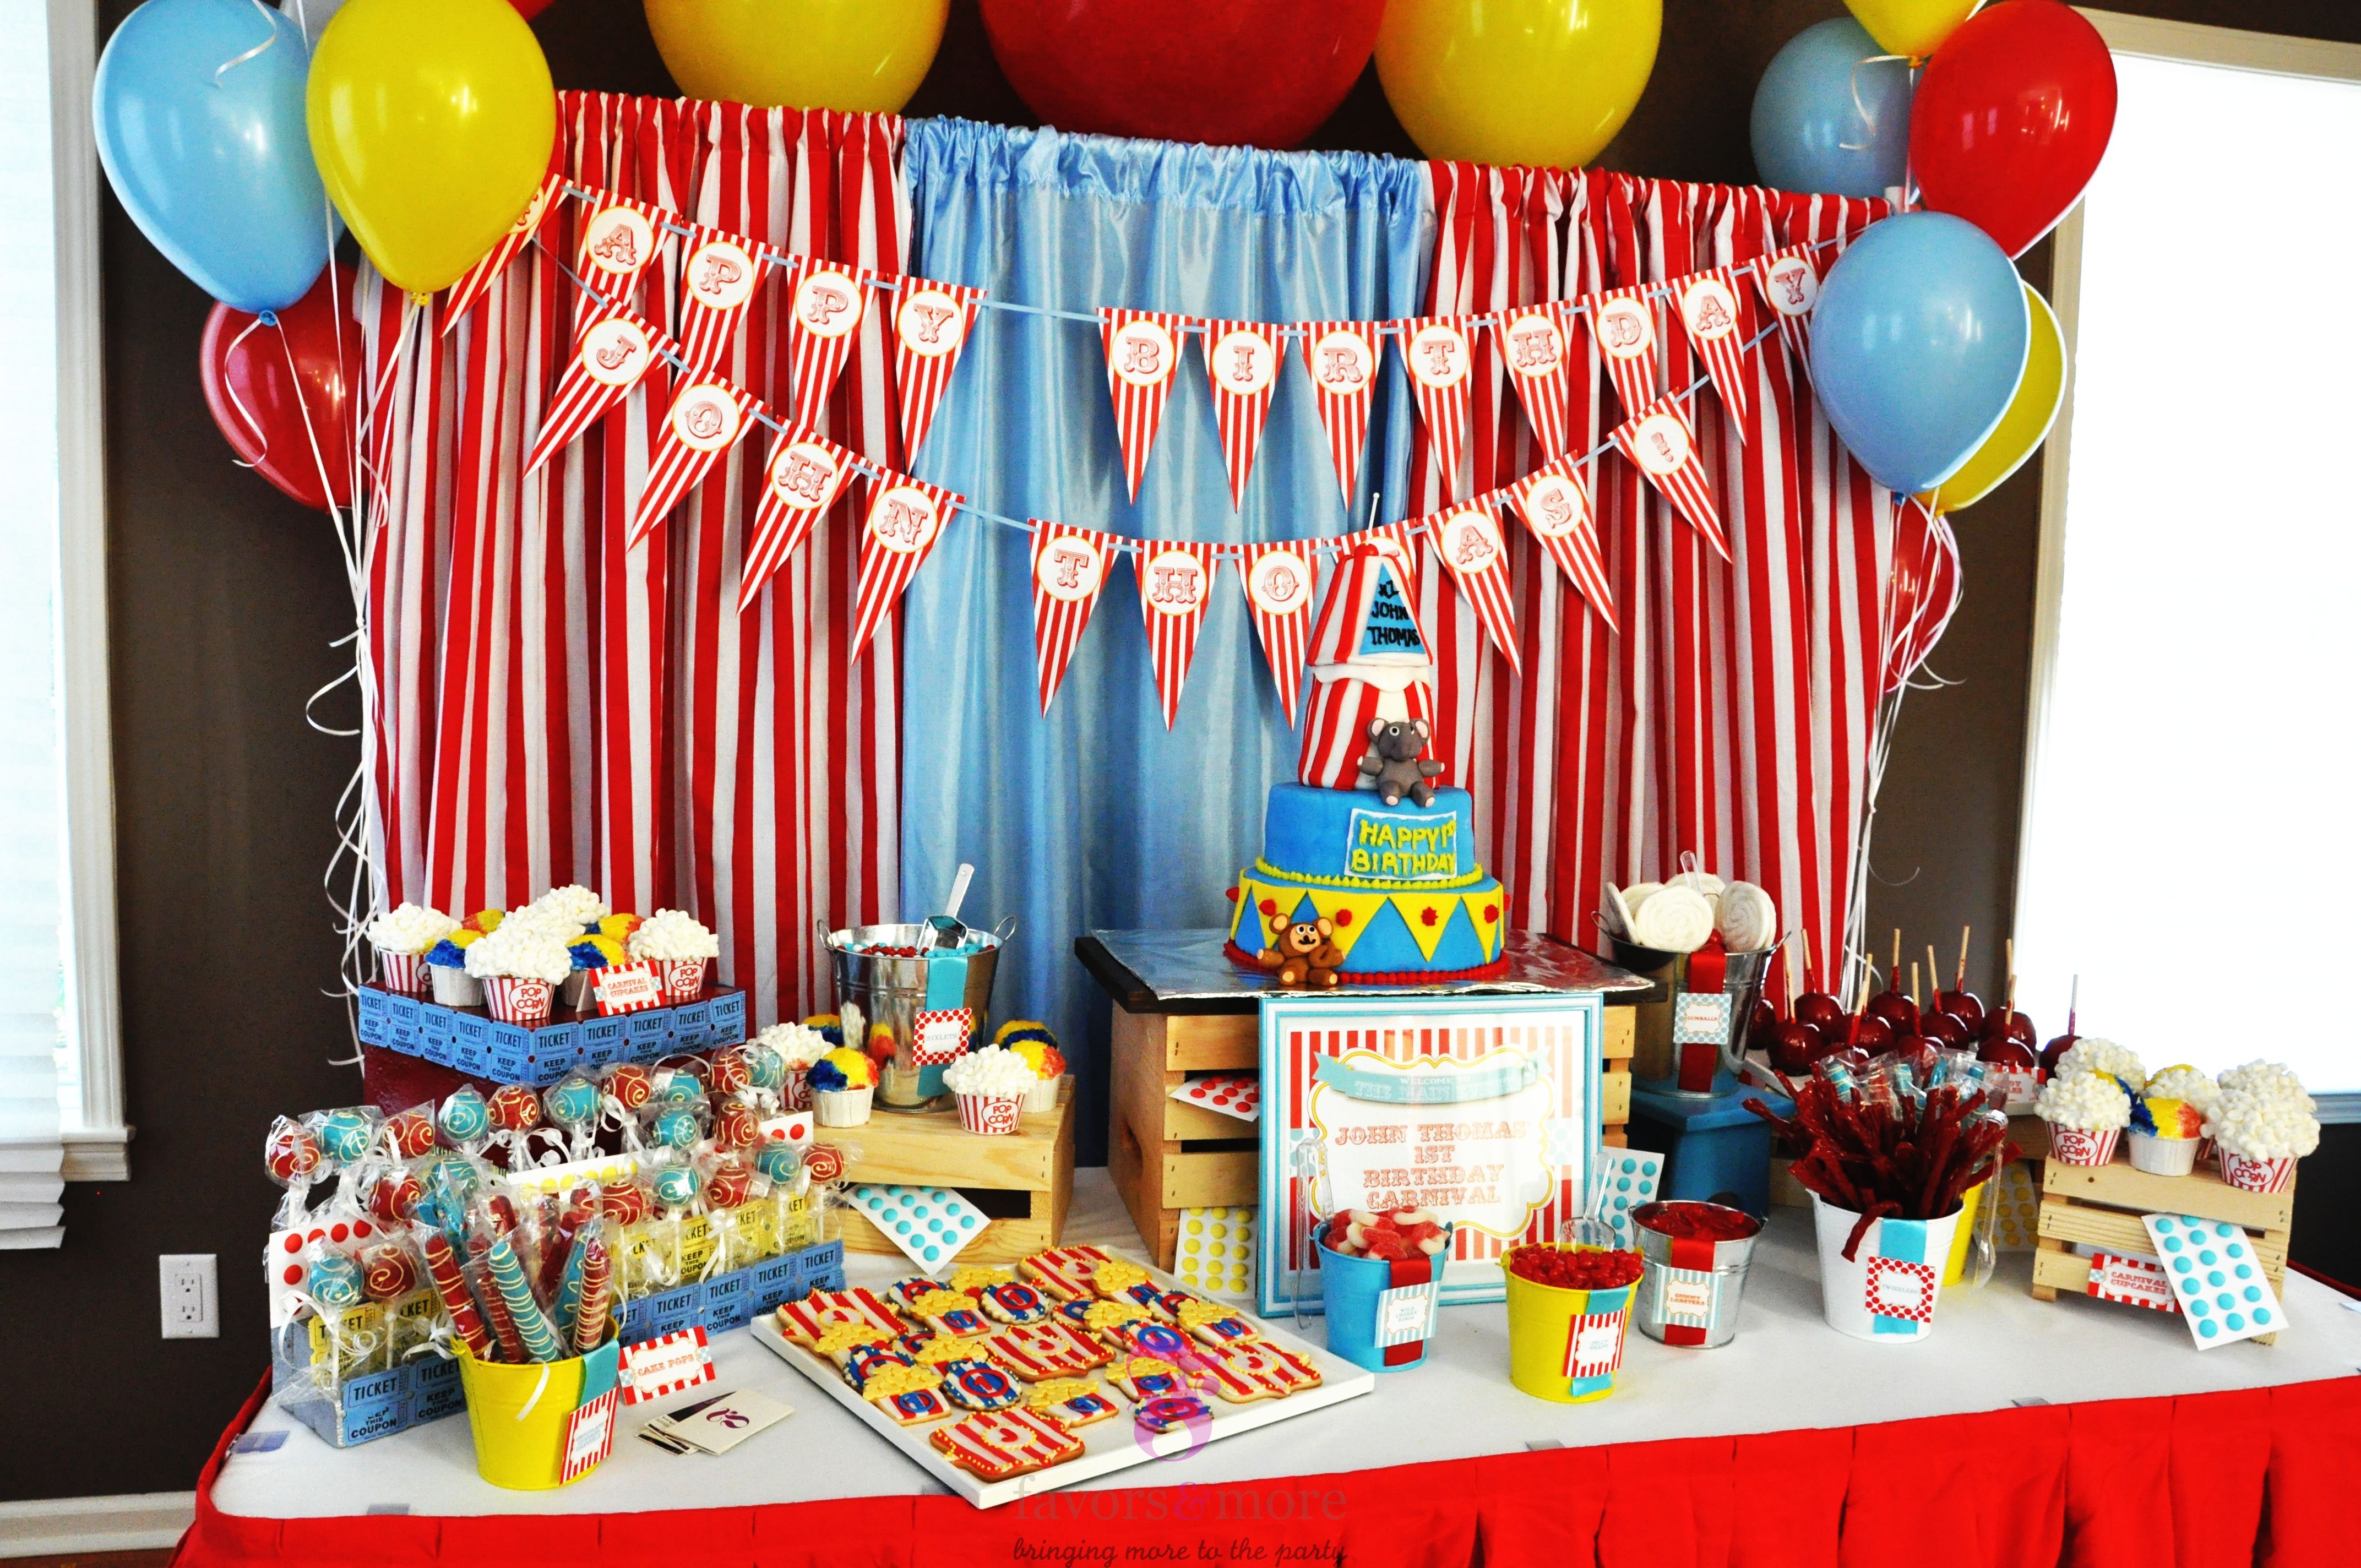 What Decorations Do You Need For A Birthday Party